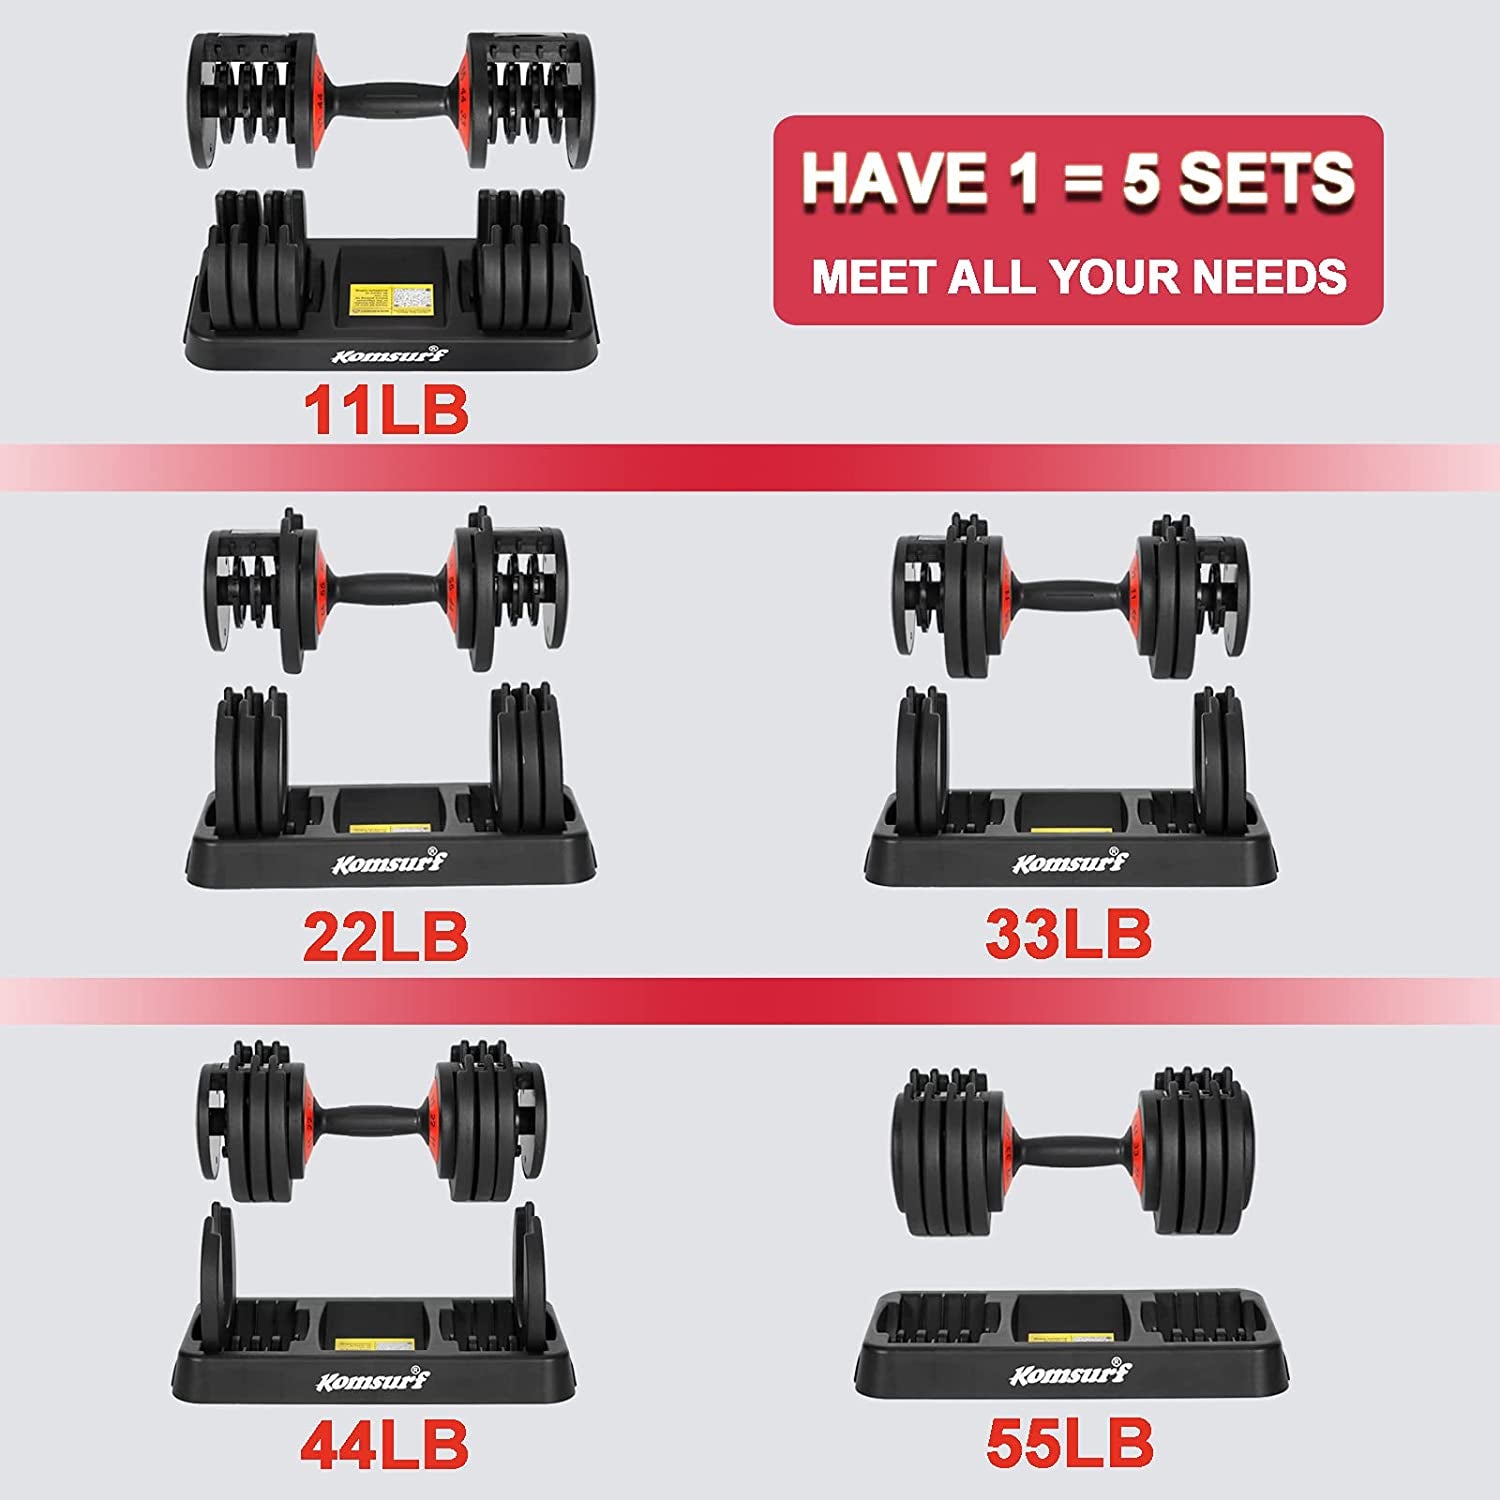 Adjustable Dumbbell, 25/55 Lb Single Dumbbell for Men and Women with Weight Dial Function, Fast Adjust Weight by Rotating Handle, Black Dumbbell with Tray Suitable for Strength Training